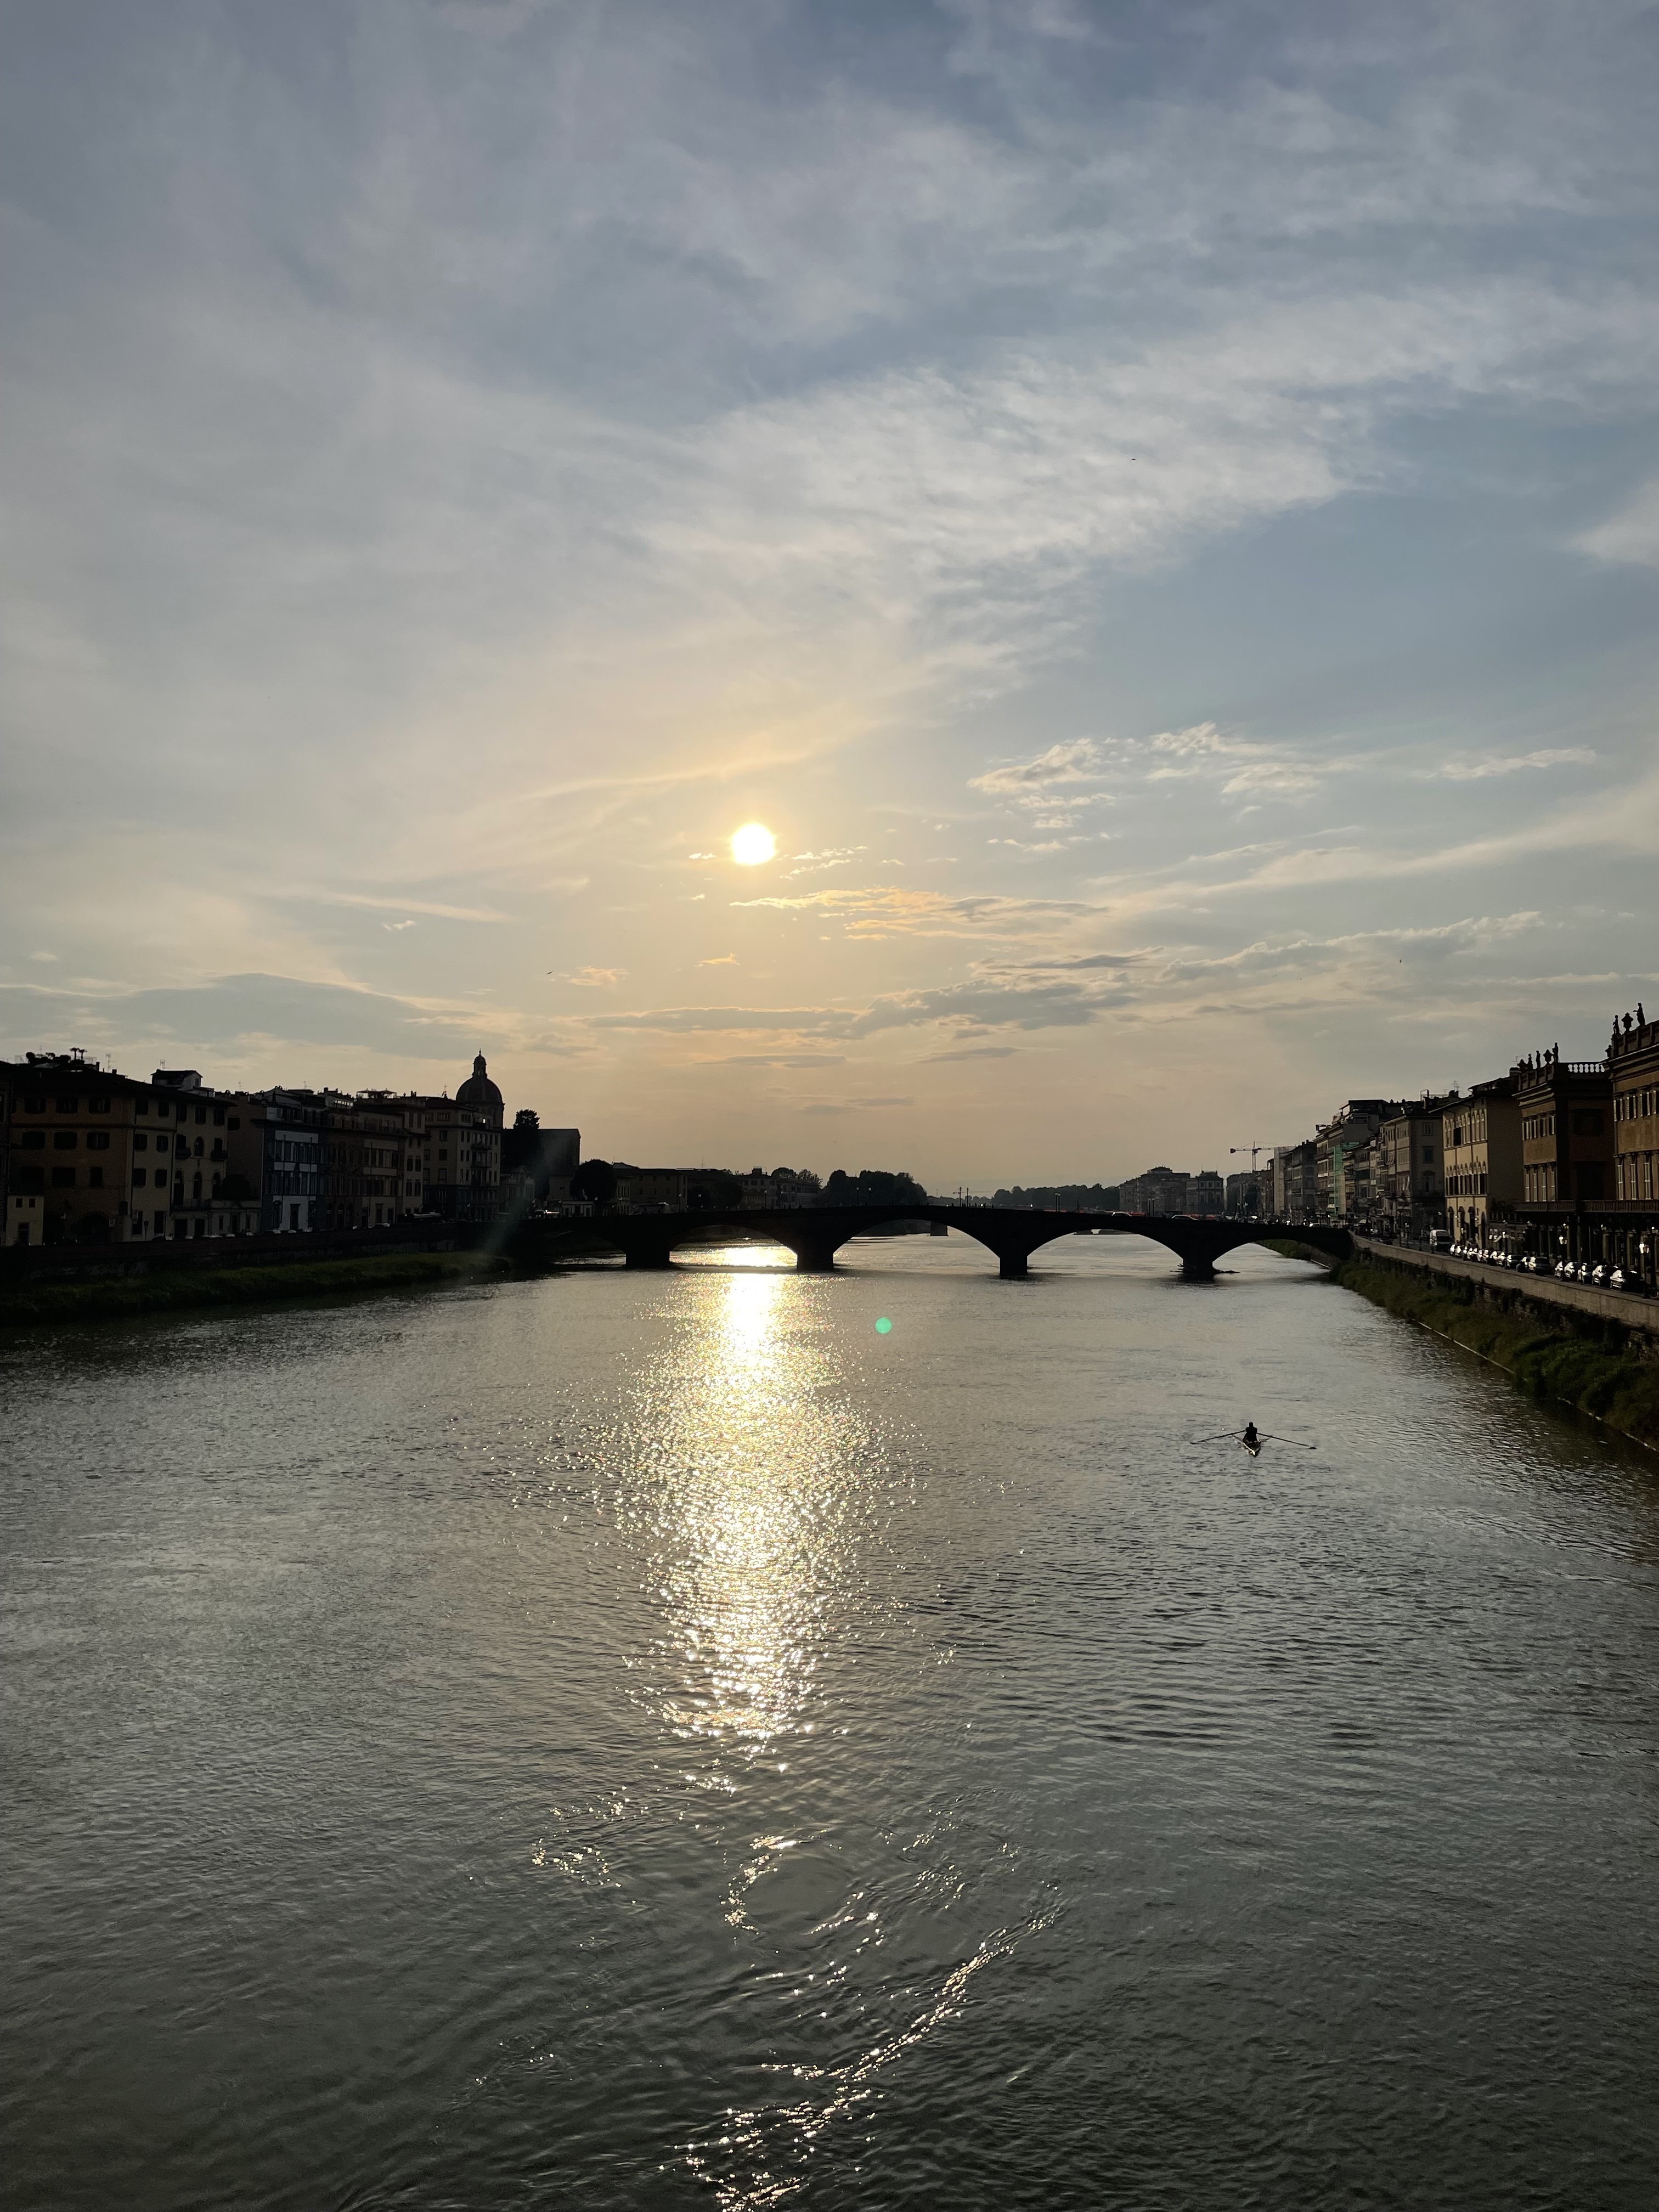 The Arno River as the sun goes down